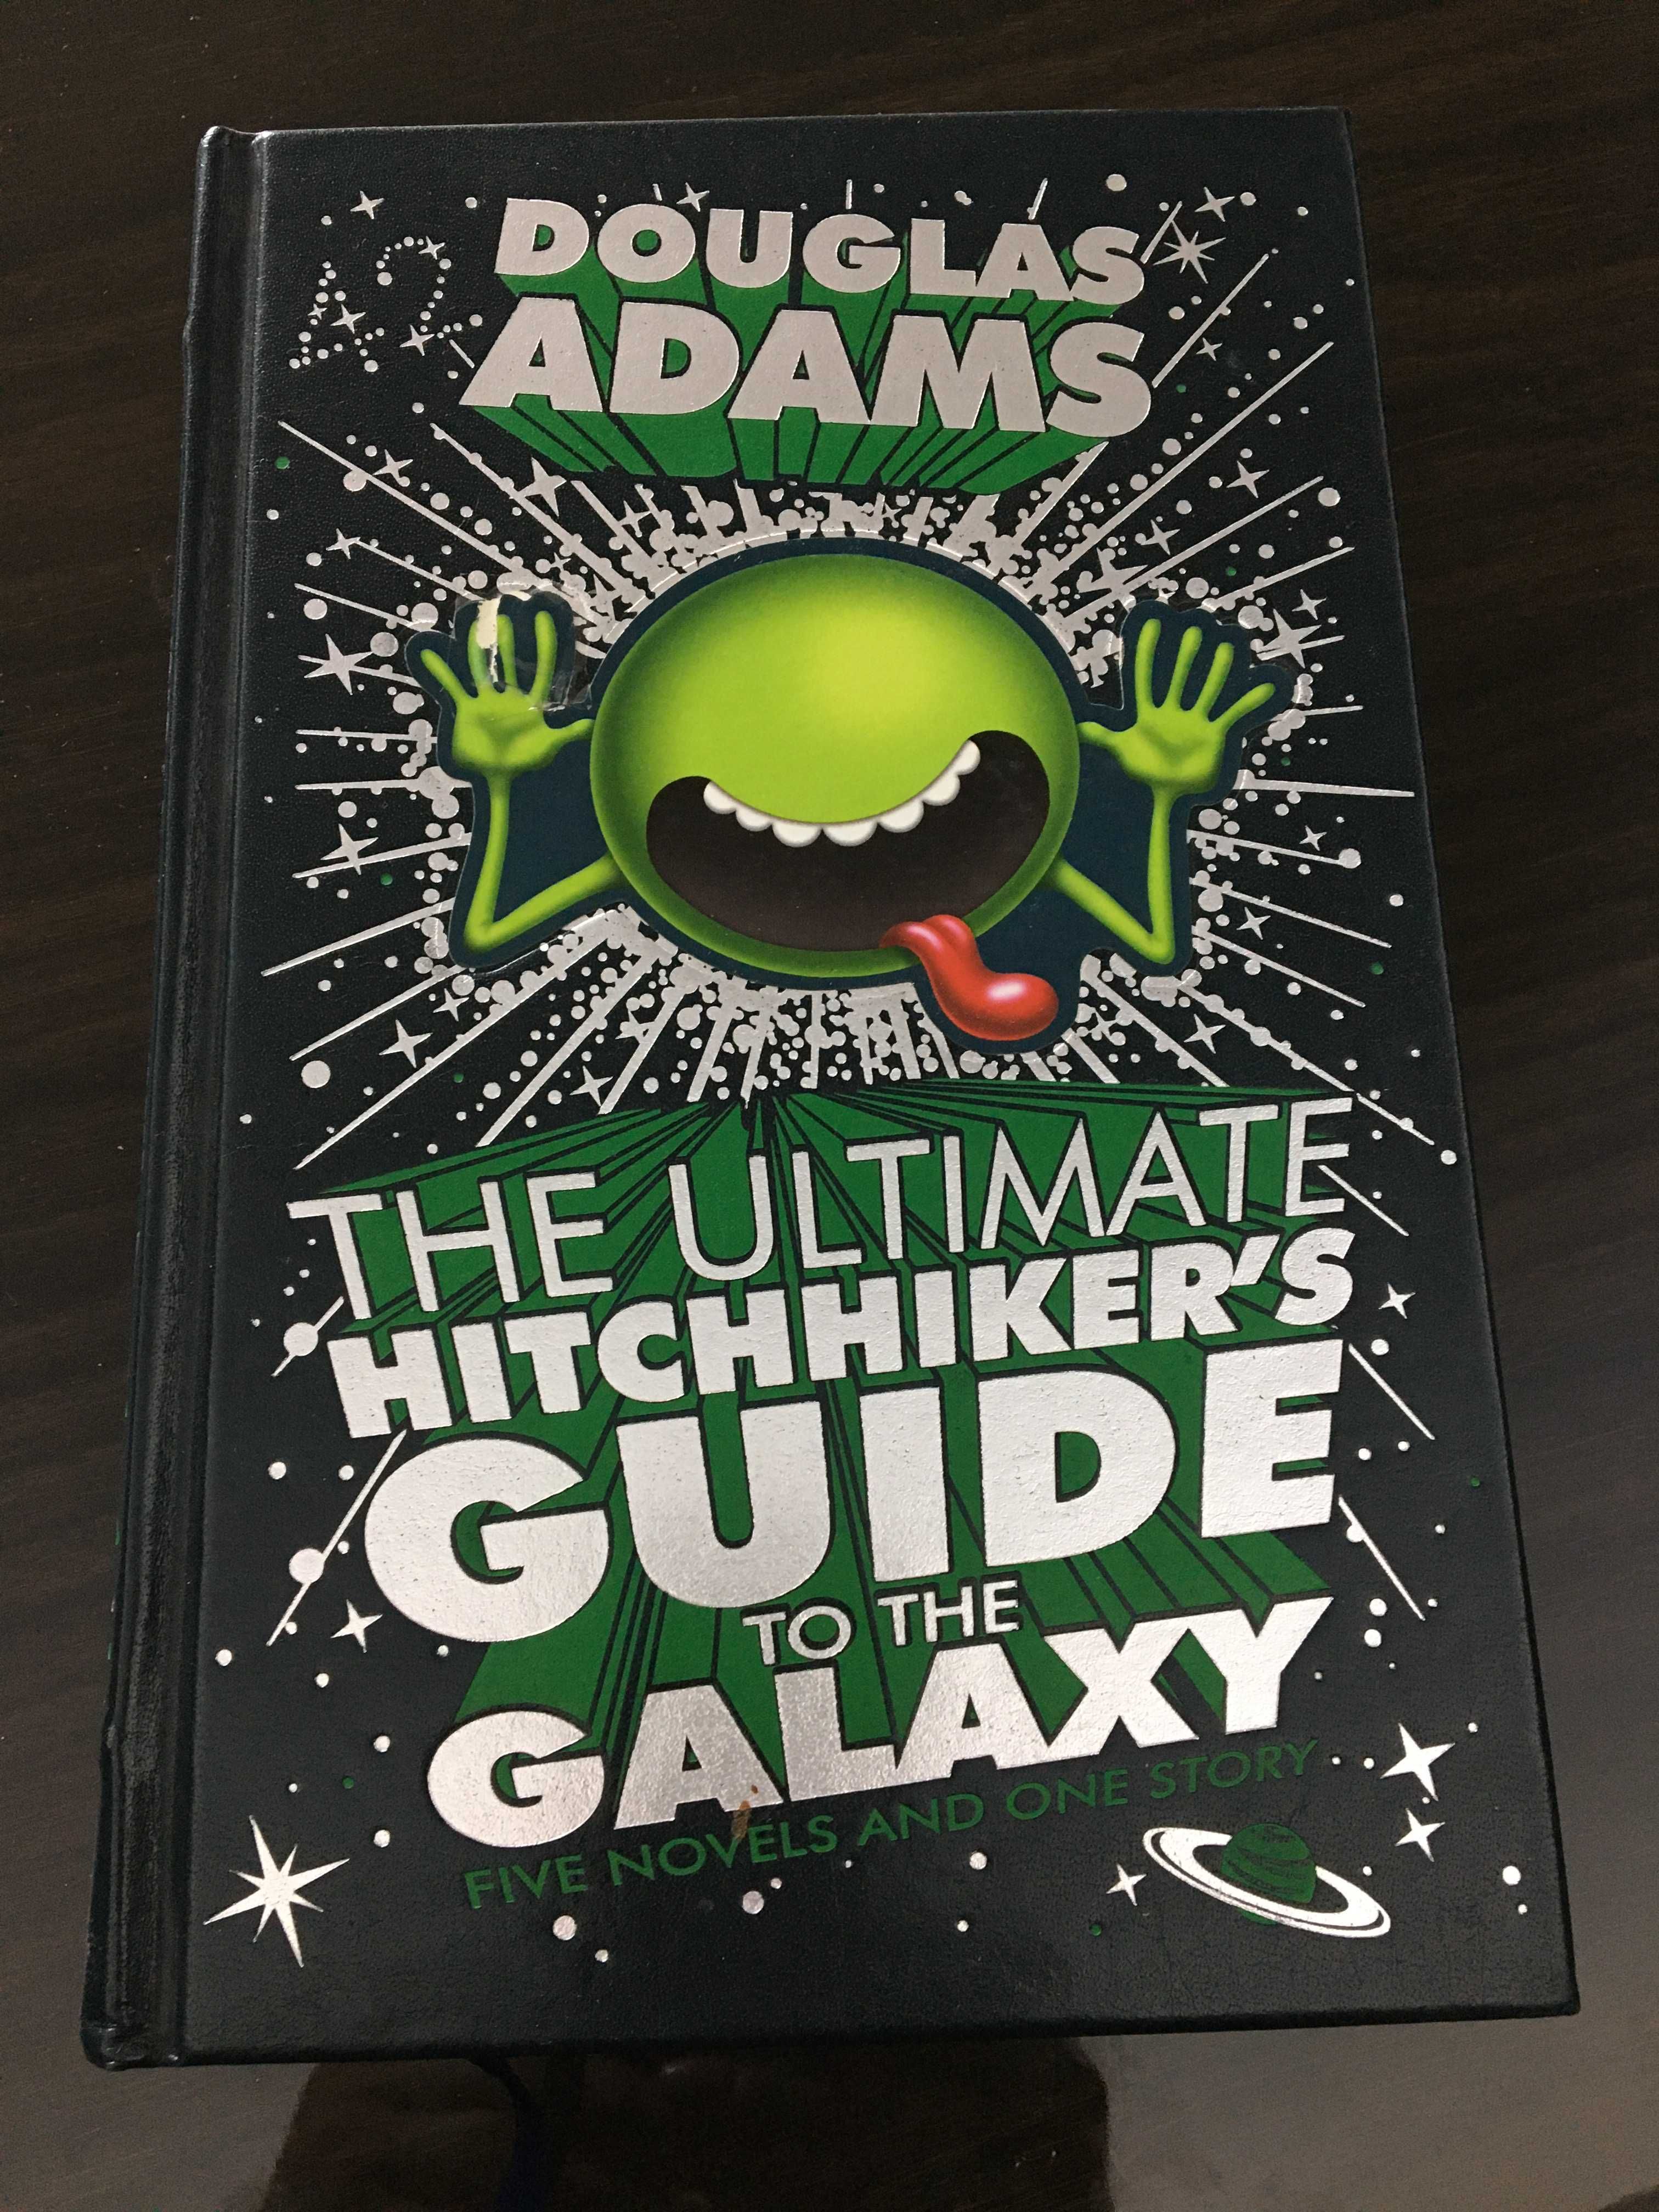 The Ultimate HitchHiker's Guide To The Galaxy